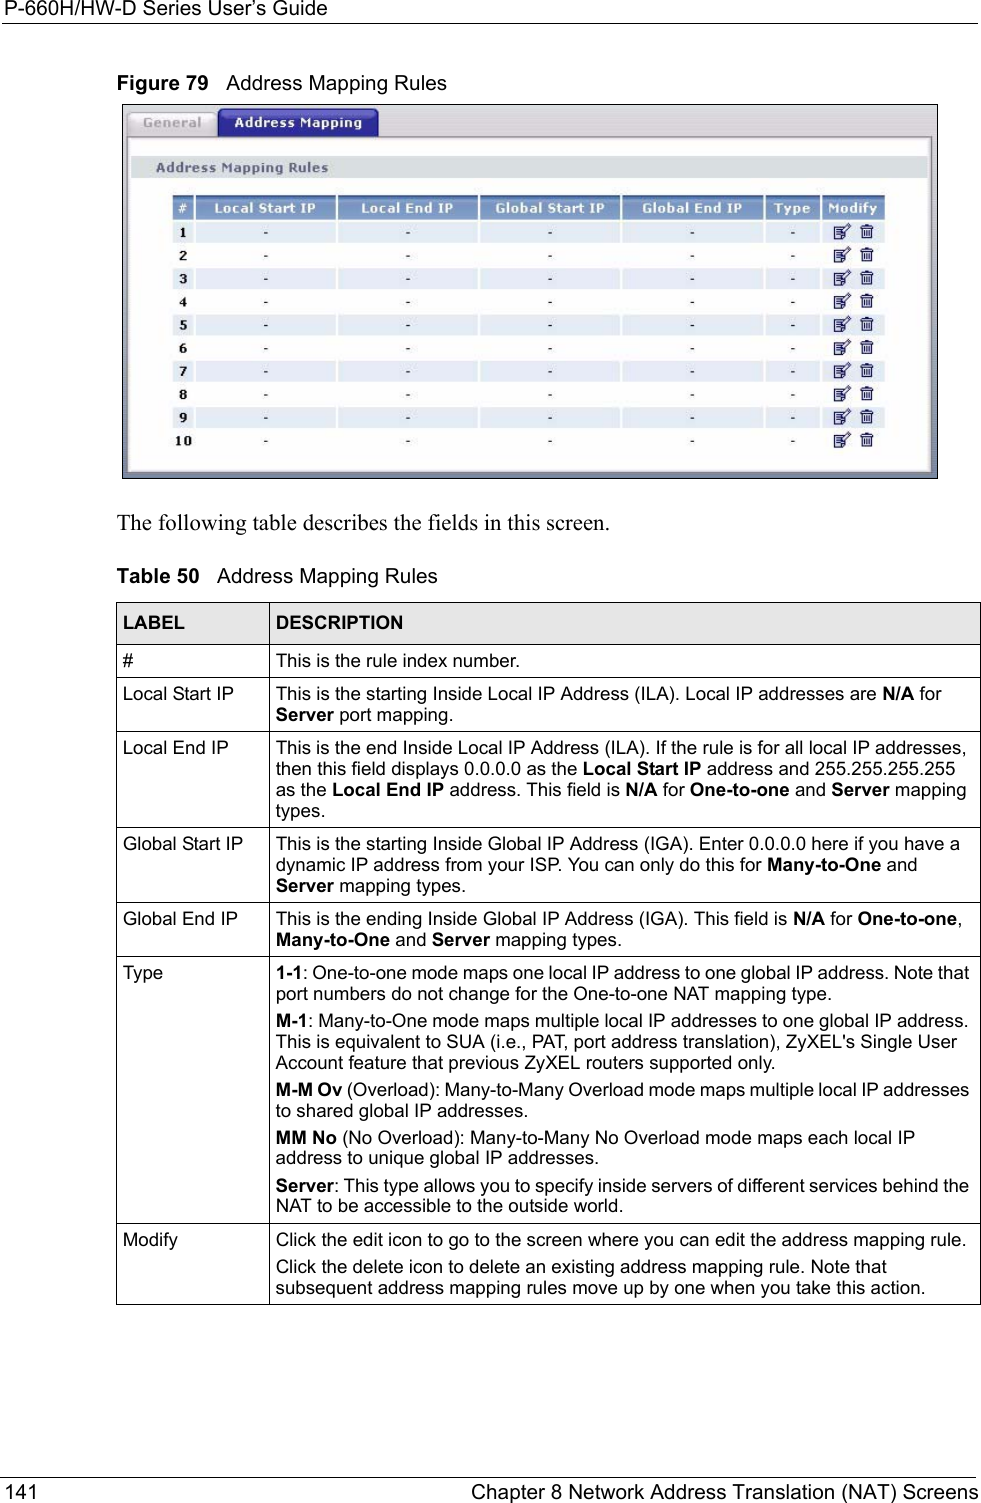 P-660H/HW-D Series User’s Guide141 Chapter 8 Network Address Translation (NAT) ScreensFigure 79   Address Mapping RulesThe following table describes the fields in this screen. Table 50   Address Mapping RulesLABEL DESCRIPTION#This is the rule index number.Local Start IP This is the starting Inside Local IP Address (ILA). Local IP addresses are N/A for Server port mapping.Local End IP This is the end Inside Local IP Address (ILA). If the rule is for all local IP addresses, then this field displays 0.0.0.0 as the Local Start IP address and 255.255.255.255 as the Local End IP address. This field is N/A for One-to-one and Server mapping types.Global Start IP This is the starting Inside Global IP Address (IGA). Enter 0.0.0.0 here if you have a dynamic IP address from your ISP. You can only do this for Many-to-One and Server mapping types. Global End IP This is the ending Inside Global IP Address (IGA). This field is N/A for One-to-one, Many-to-One and Server mapping types.Type 1-1: One-to-one mode maps one local IP address to one global IP address. Note that port numbers do not change for the One-to-one NAT mapping type. M-1: Many-to-One mode maps multiple local IP addresses to one global IP address. This is equivalent to SUA (i.e., PAT, port address translation), ZyXEL&apos;s Single User Account feature that previous ZyXEL routers supported only. M-M Ov (Overload): Many-to-Many Overload mode maps multiple local IP addresses to shared global IP addresses. MM No (No Overload): Many-to-Many No Overload mode maps each local IP address to unique global IP addresses. Server: This type allows you to specify inside servers of different services behind the NAT to be accessible to the outside world. Modify Click the edit icon to go to the screen where you can edit the address mapping rule.Click the delete icon to delete an existing address mapping rule. Note that subsequent address mapping rules move up by one when you take this action.